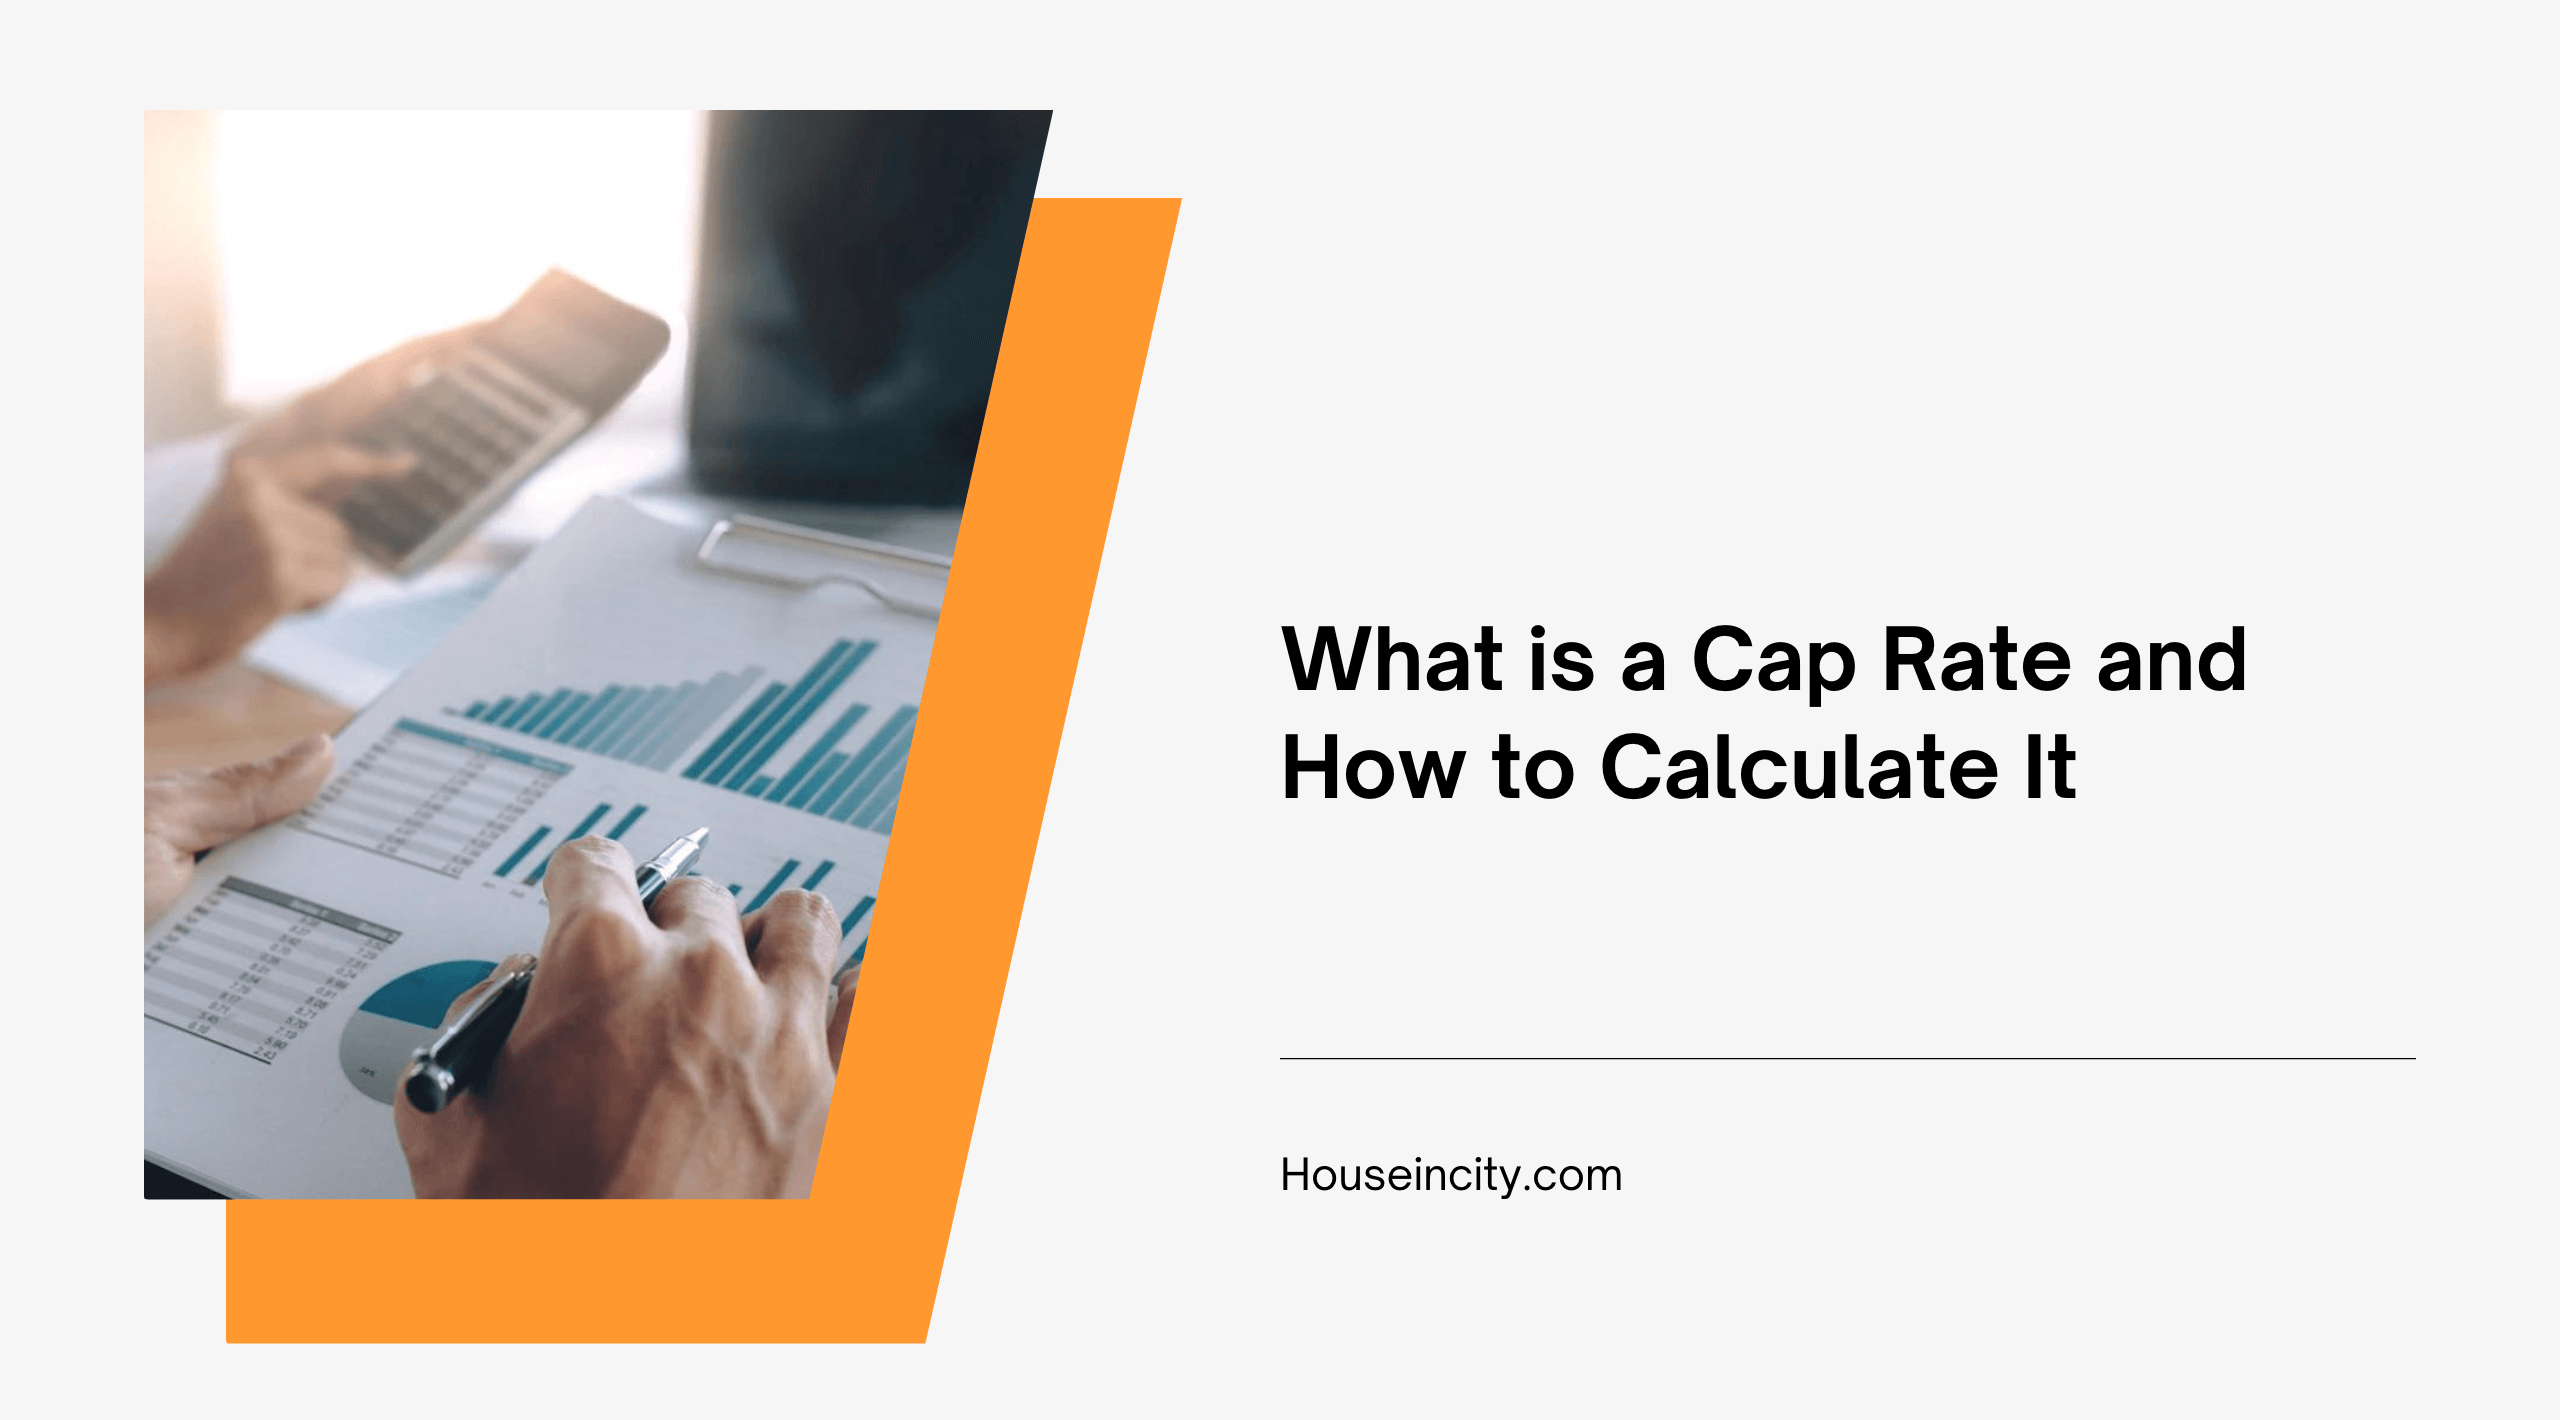 What is a Cap Rate and How to Calculate It